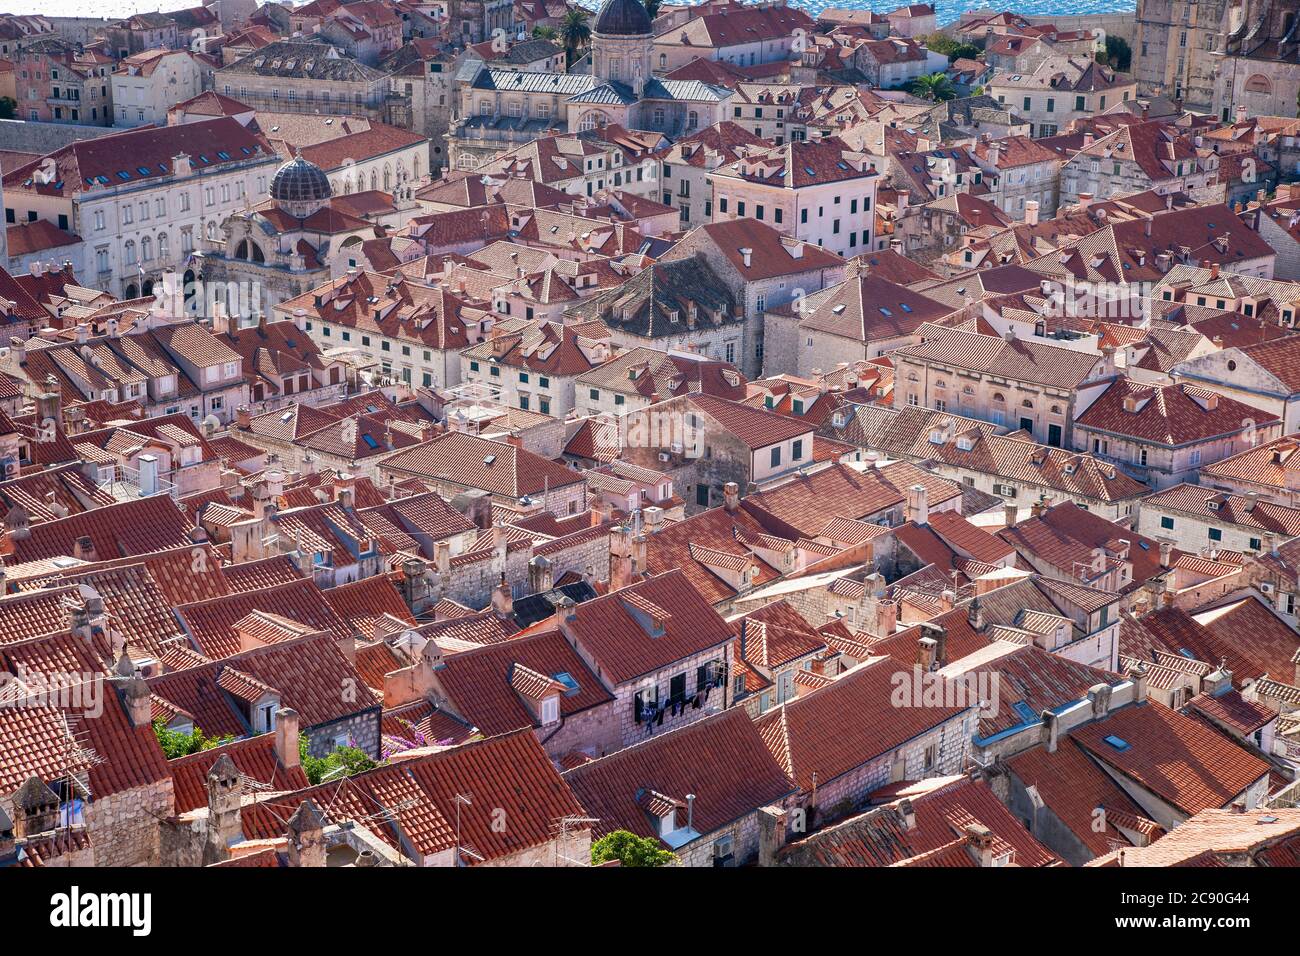 Croatia, Dubrovnik, Elevated view of red roofs Stock Photo